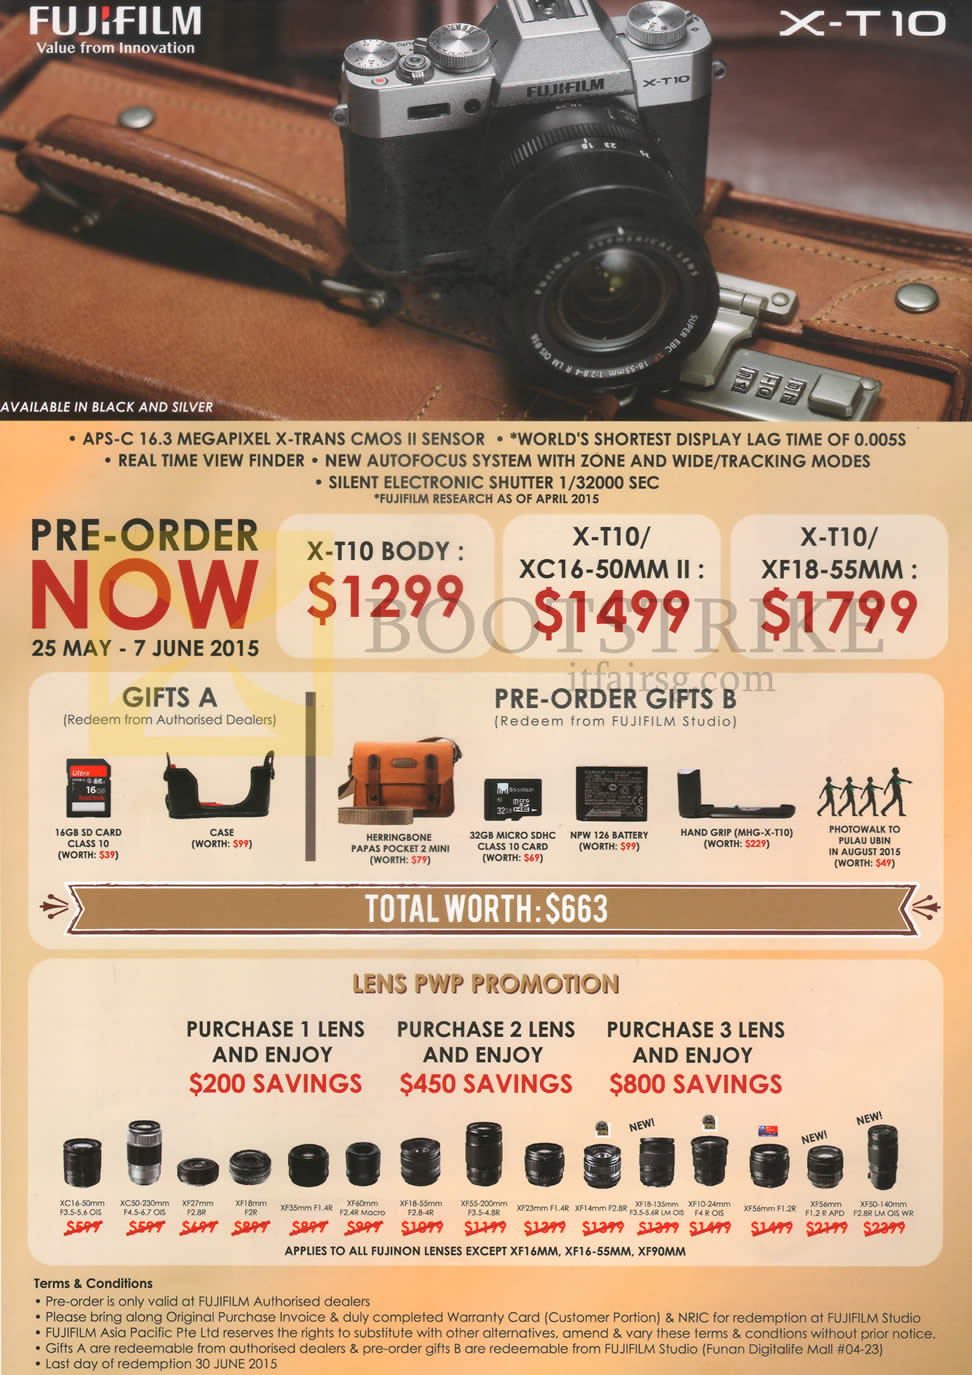 PC SHOW 2015 price list image brochure of Fujifilm Digital Cameras X-T10, Lens PWP Offers, Free Gifts, X-T10